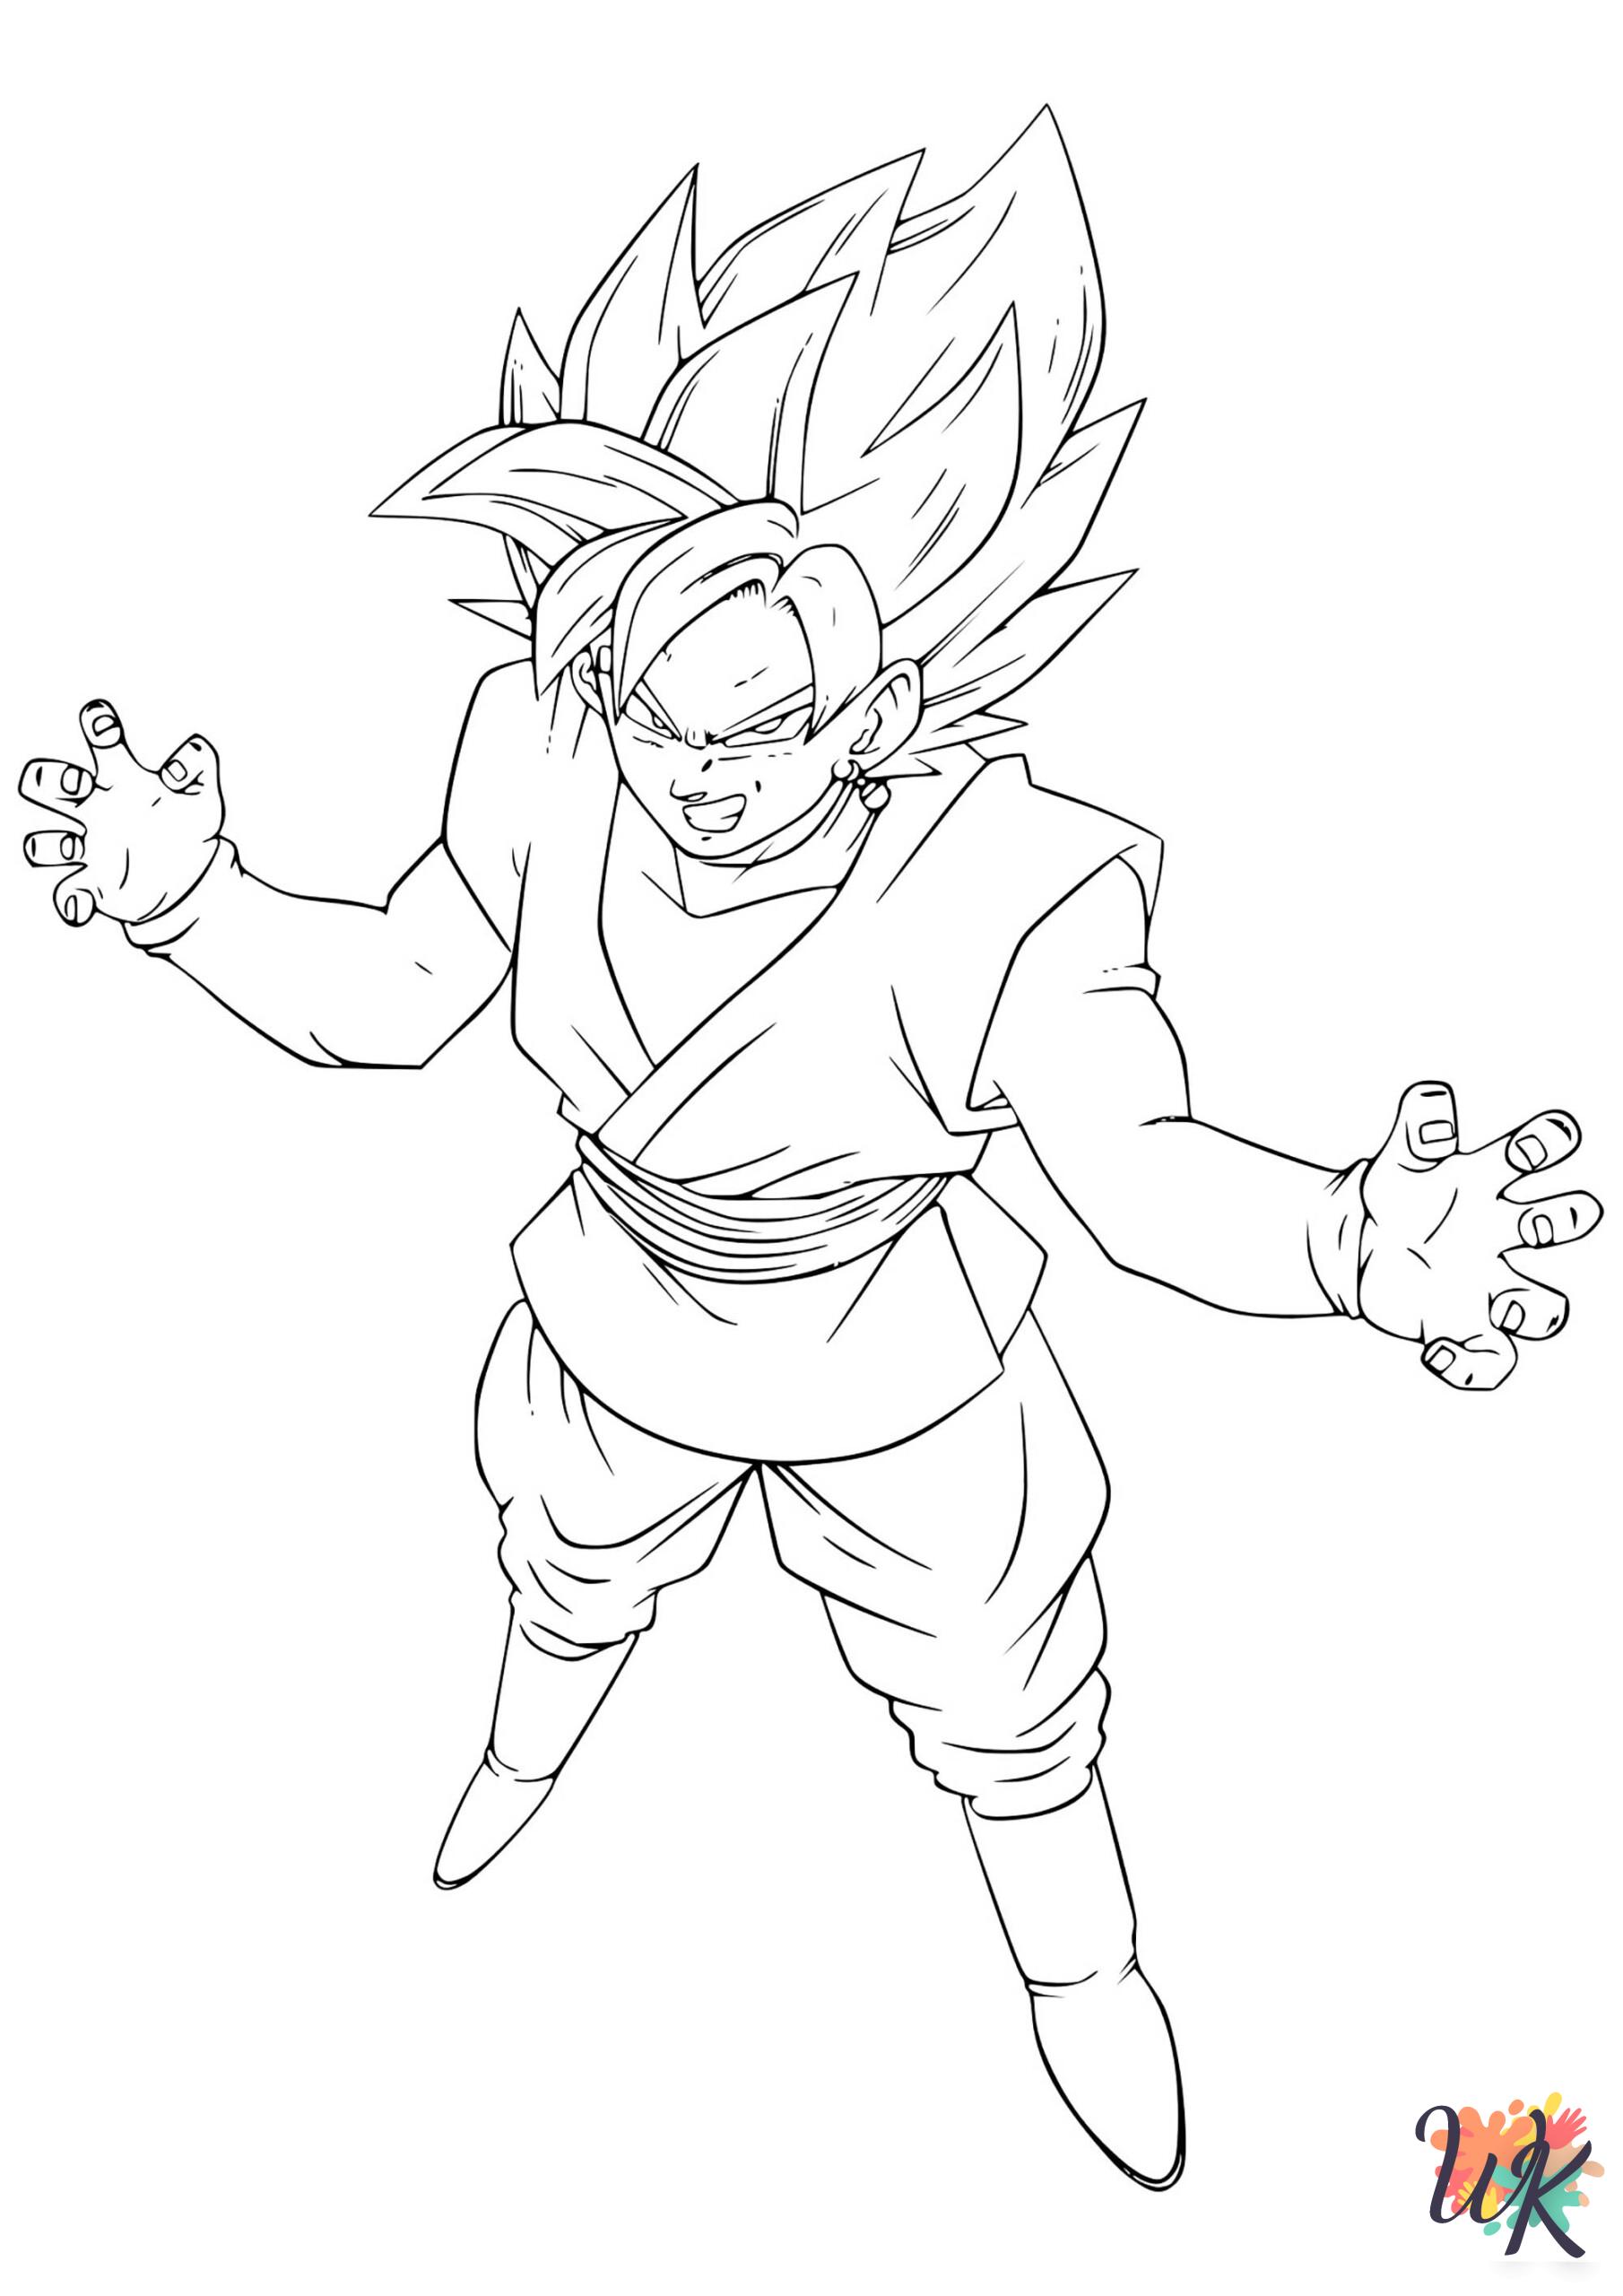 Goku themed coloring pages